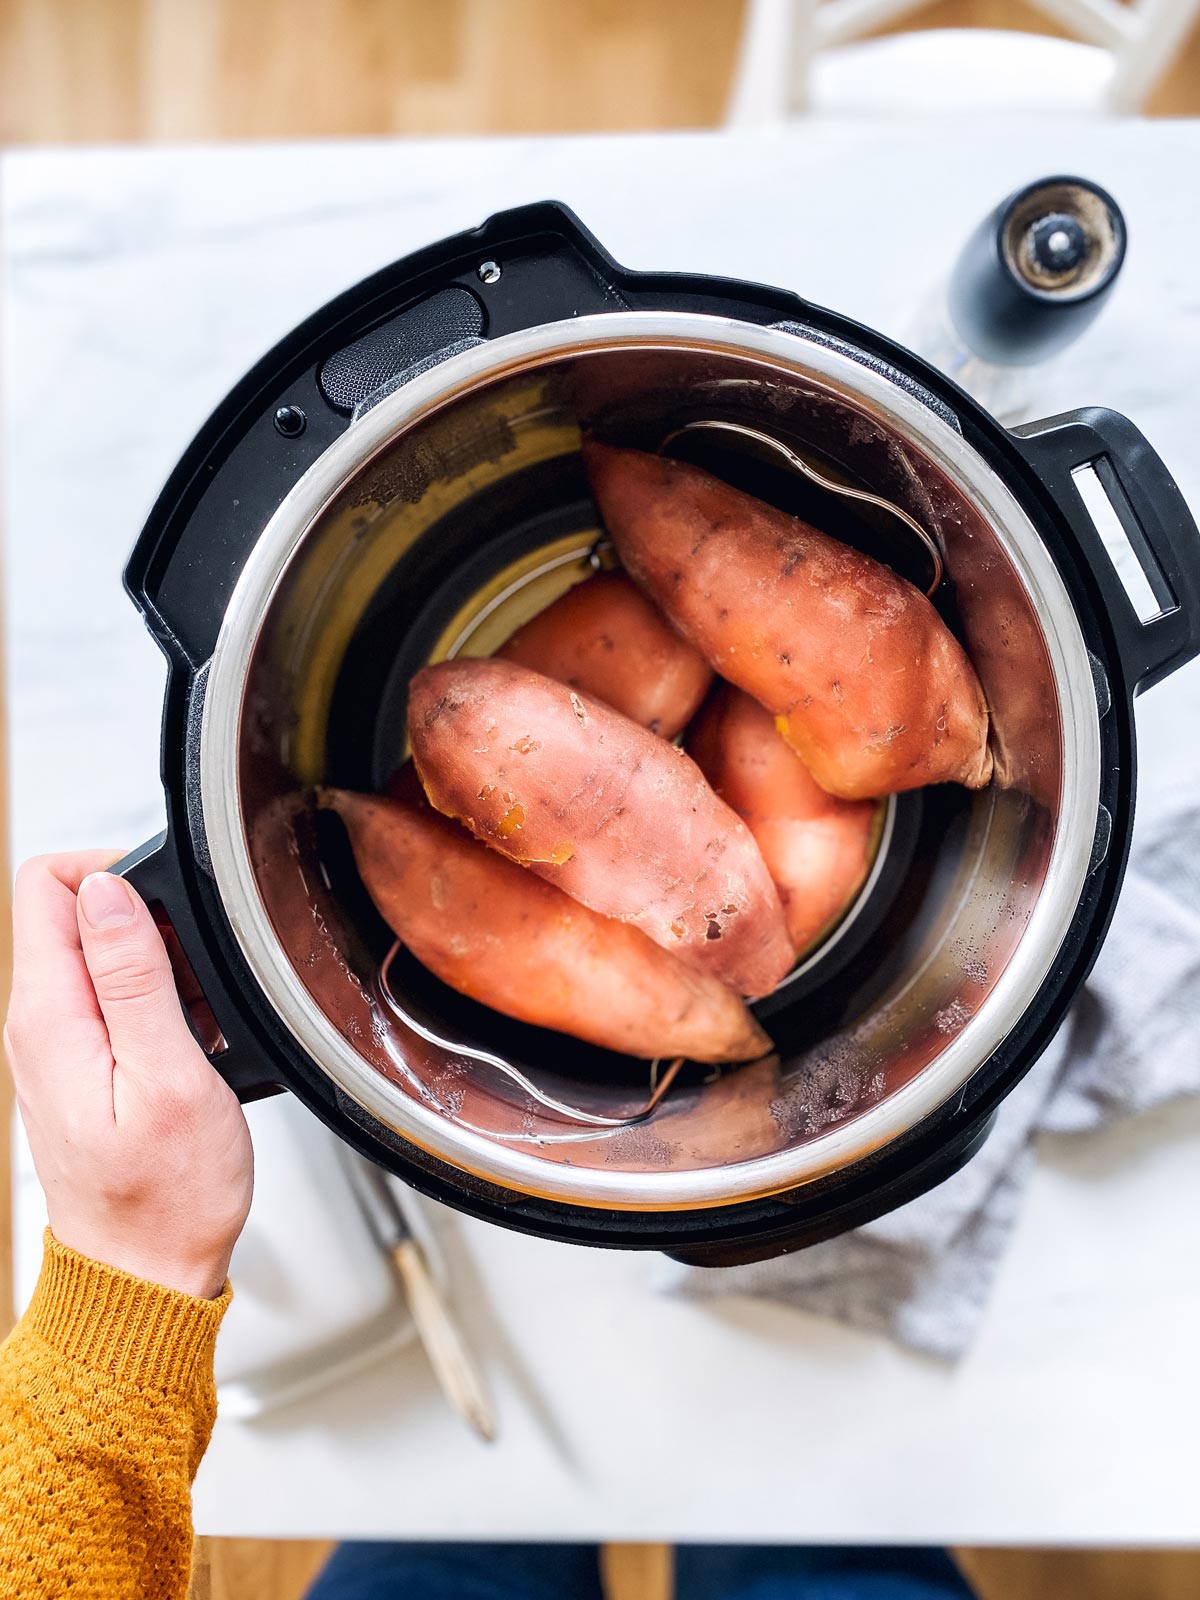 How To Cook Sweet Potatoes In An Electric Pressure Cooker